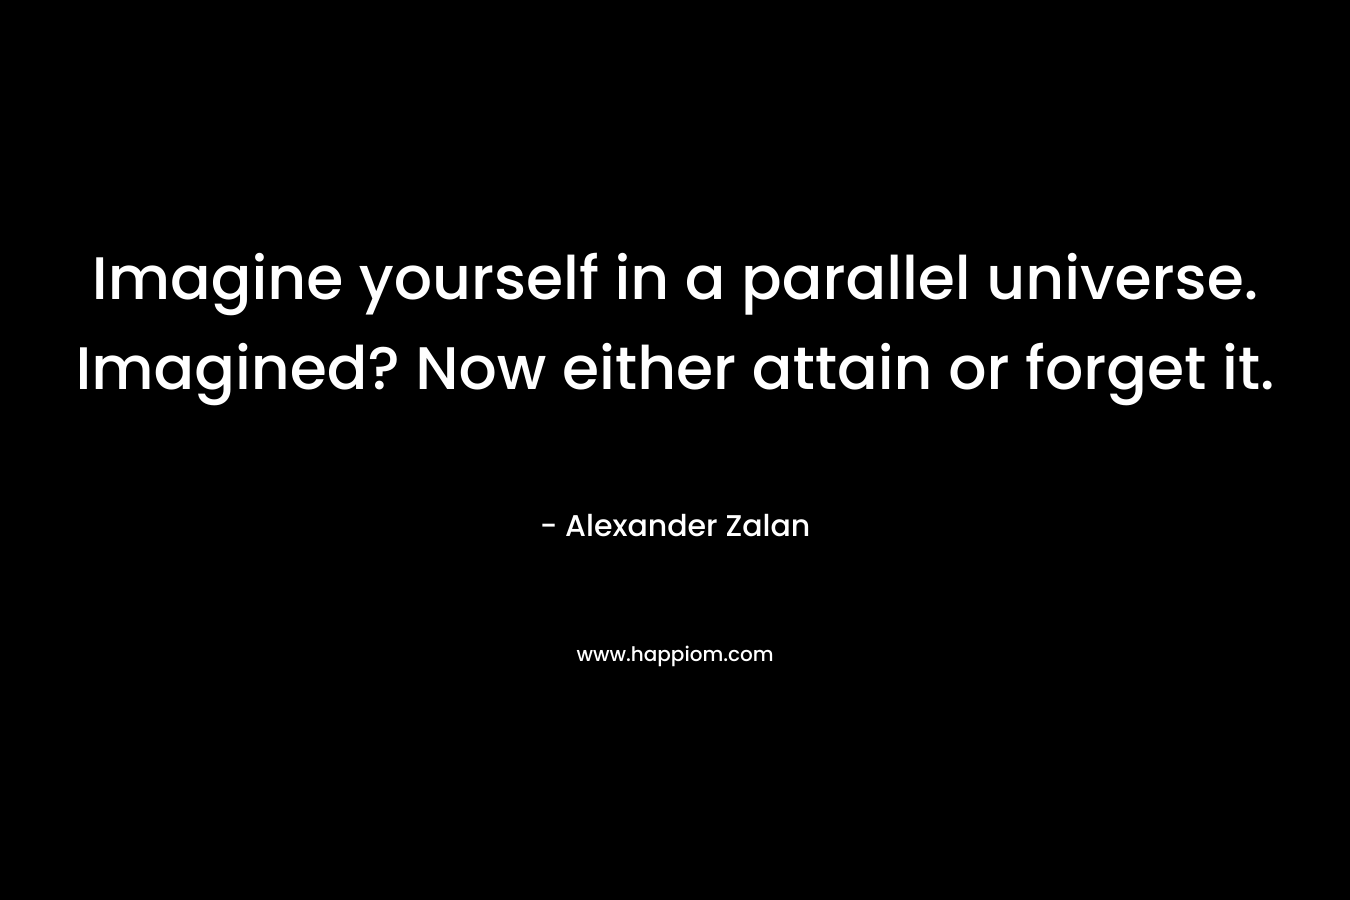 Imagine yourself in a parallel universe. Imagined? Now either attain or forget it.